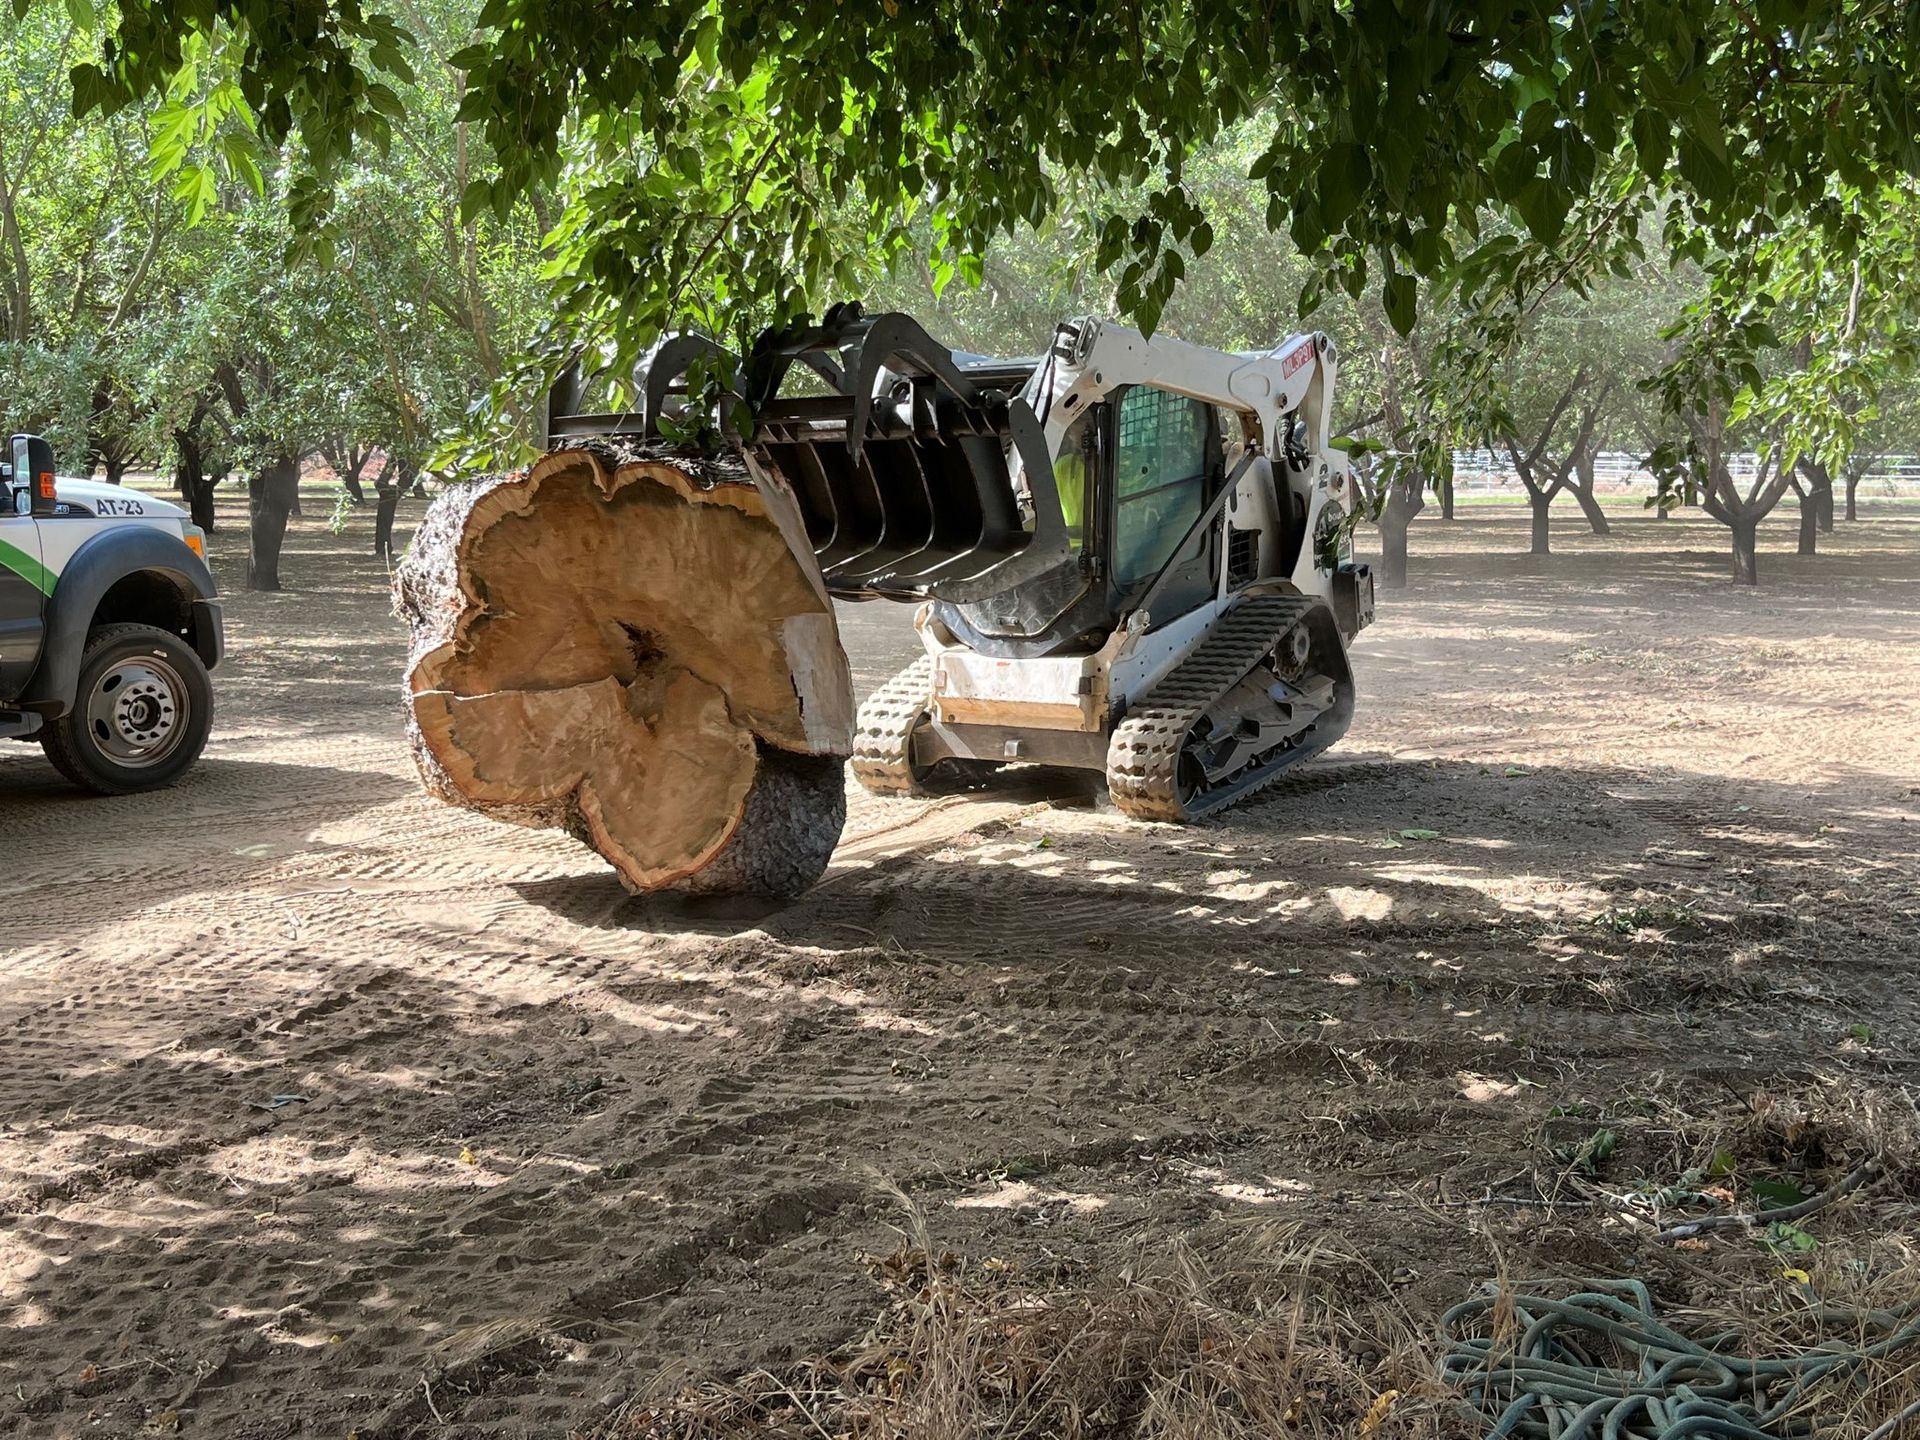 About Trees Removing a Tree in Redding, CA